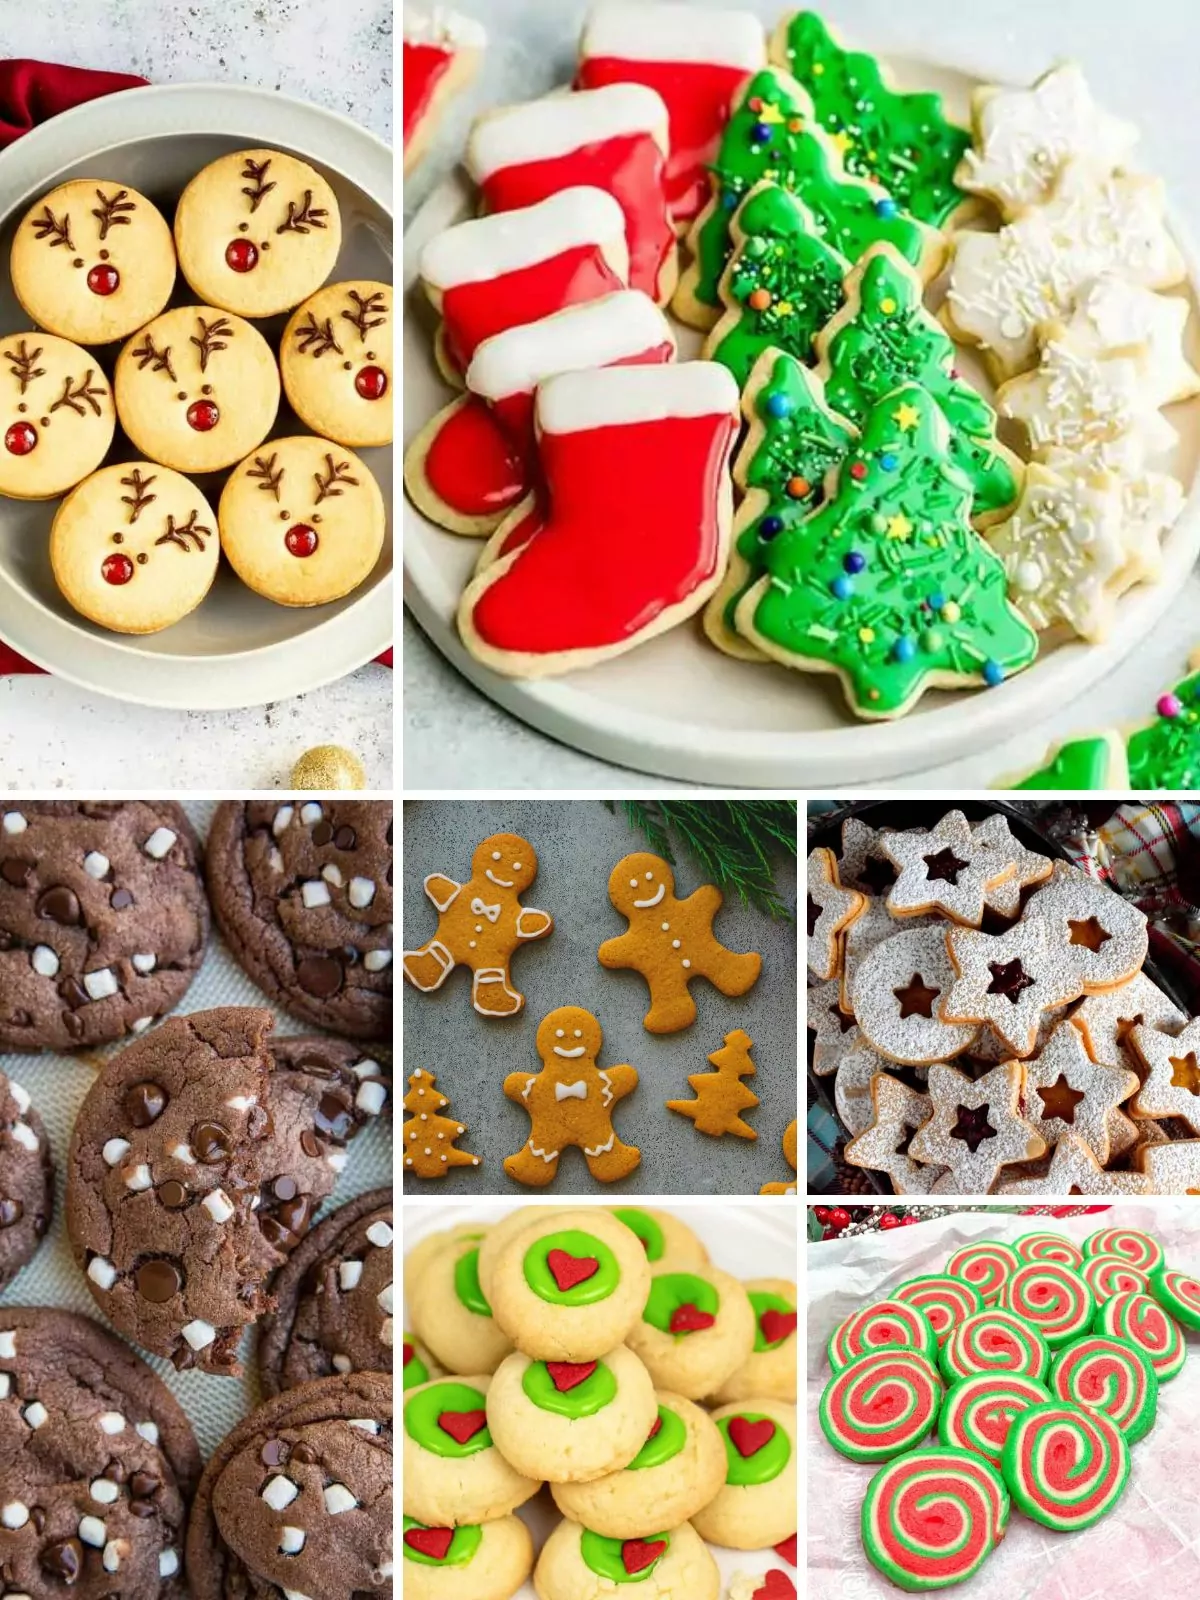 50 Christmas cookie recipes.